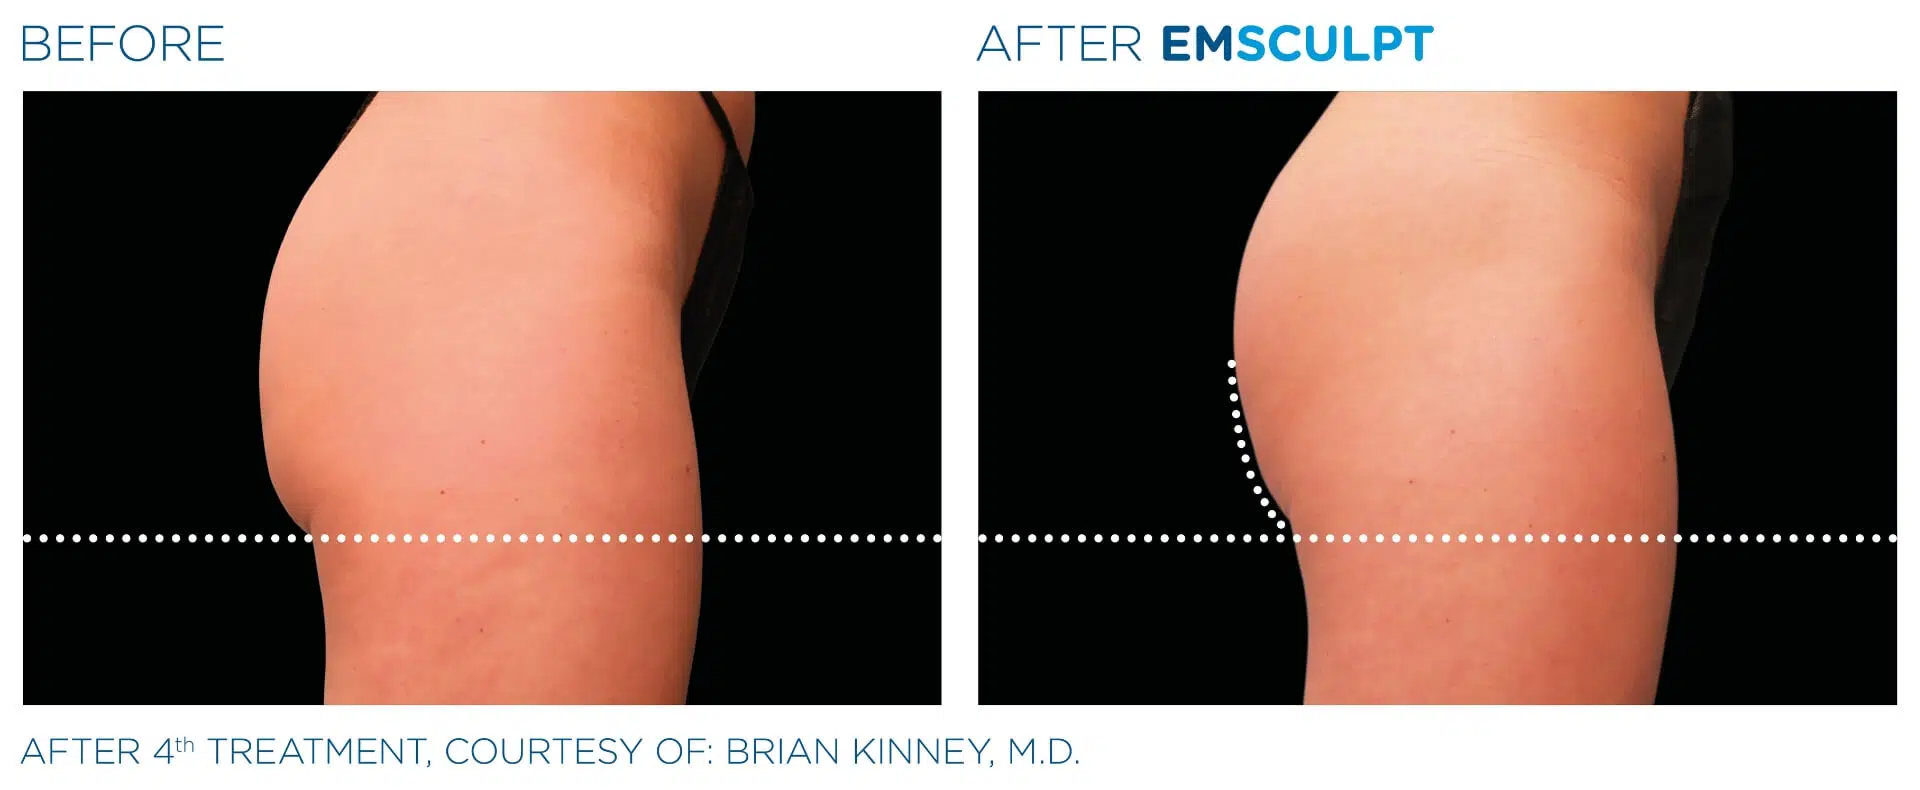 Emsculpt booty before & after results.